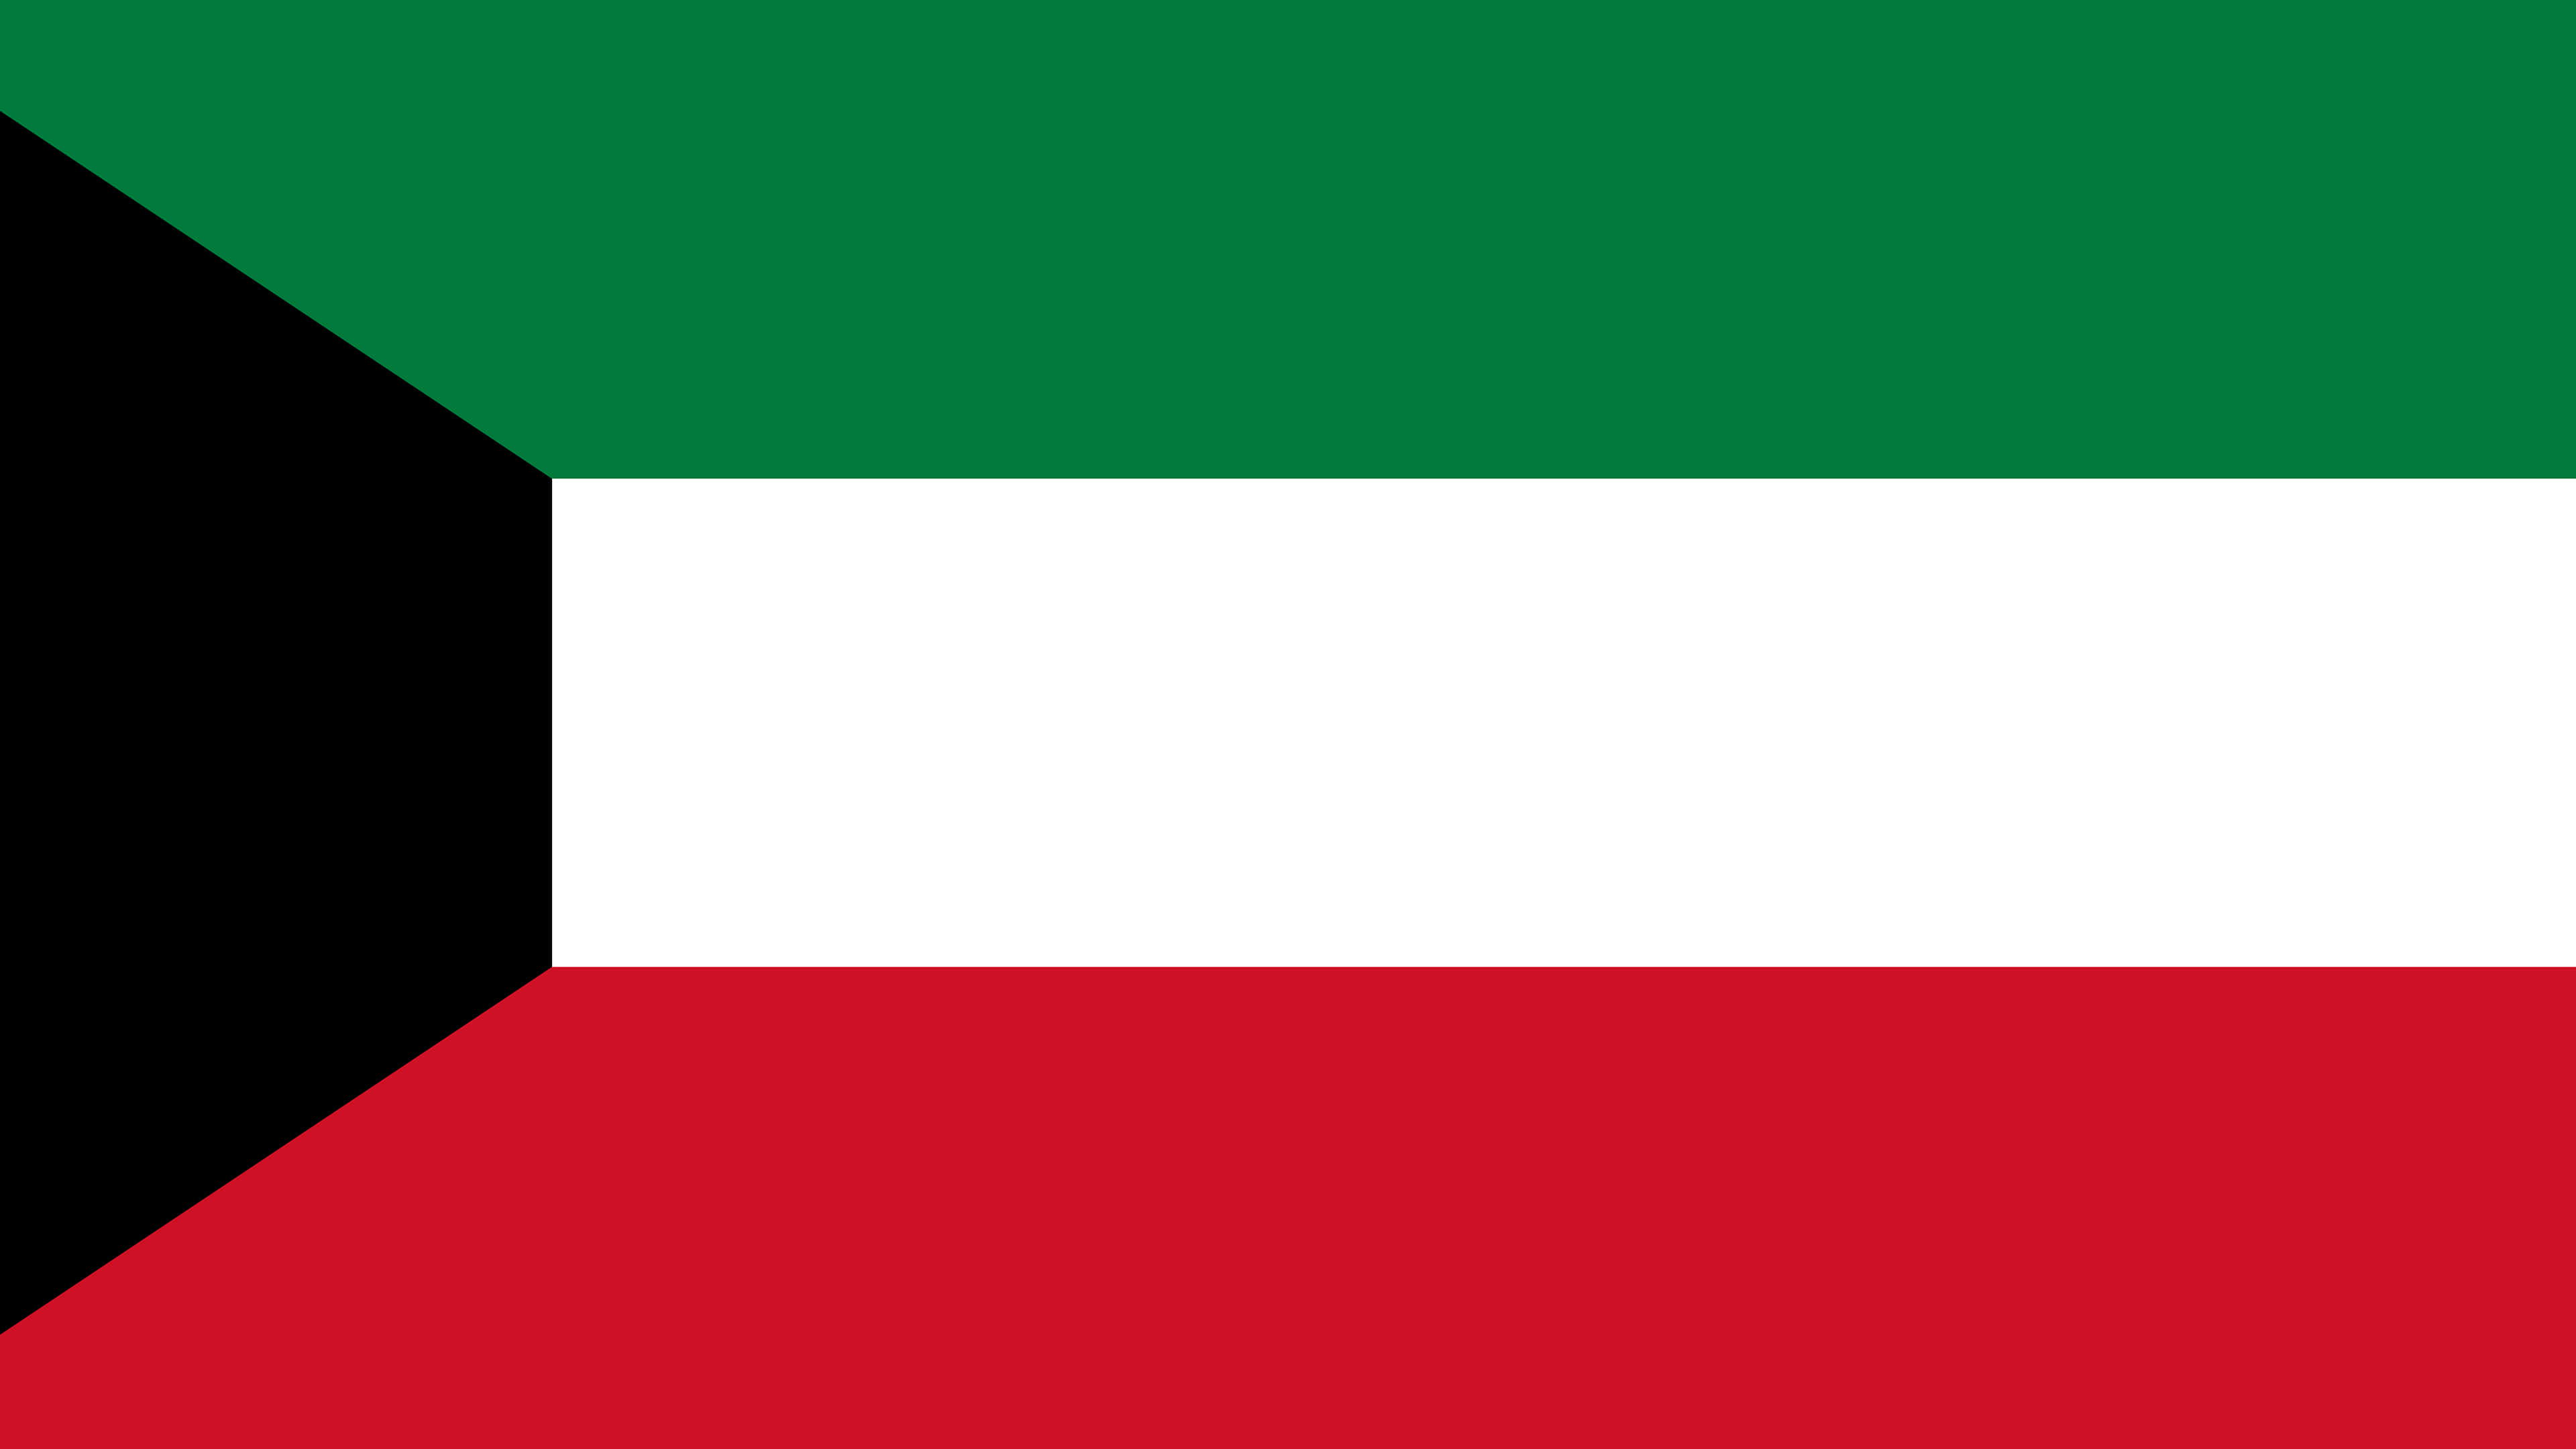 Kuwait Flag Wallpapers - Wallpaper Cave